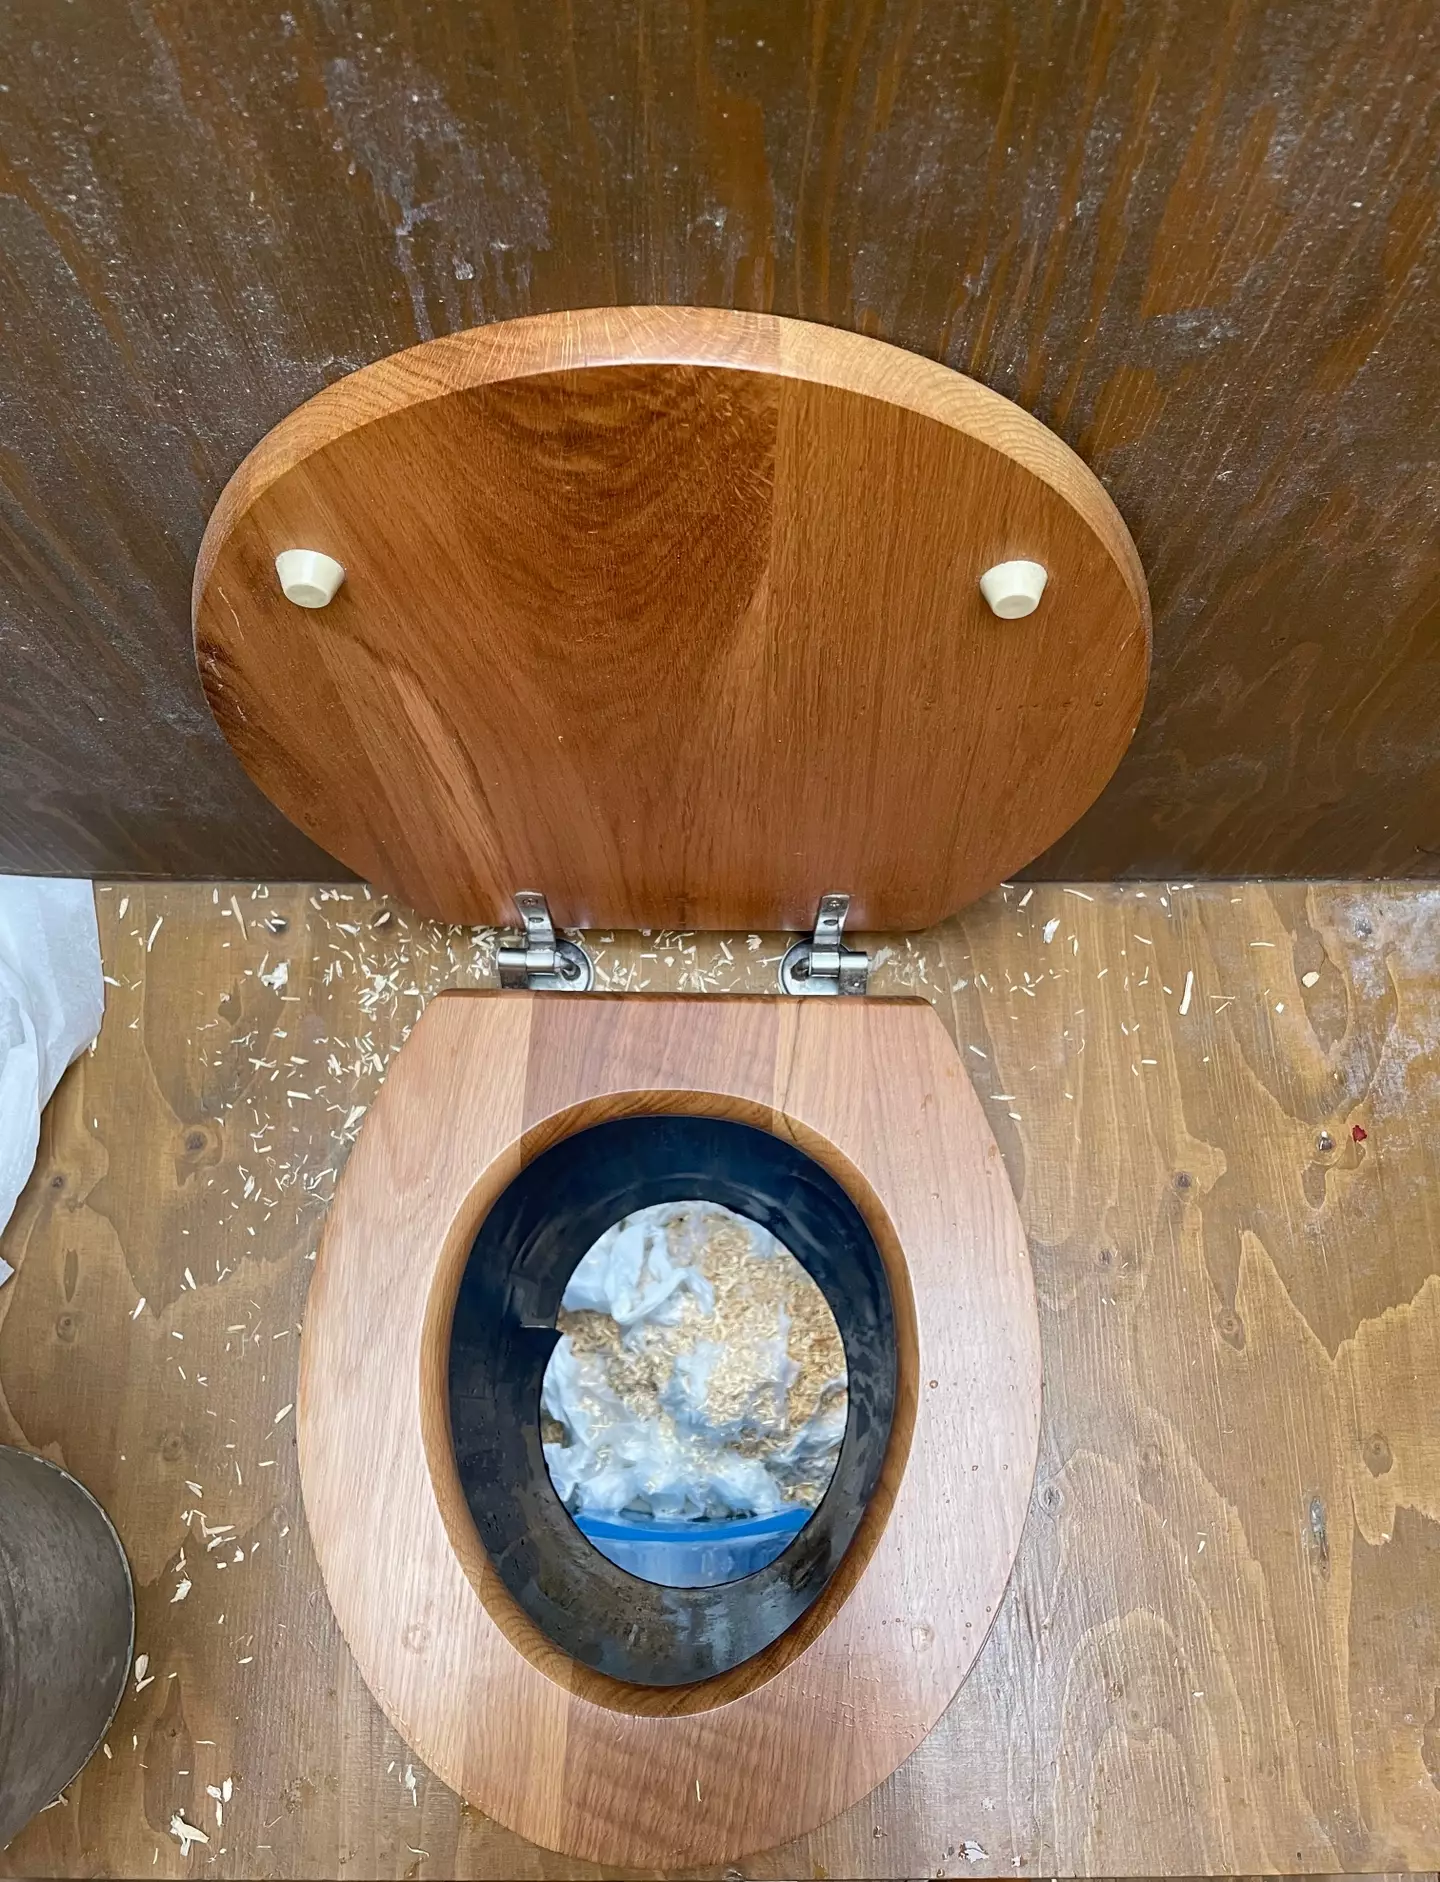 Customers at Frank's are asked to throw sawdust after they've finished in the toilet (